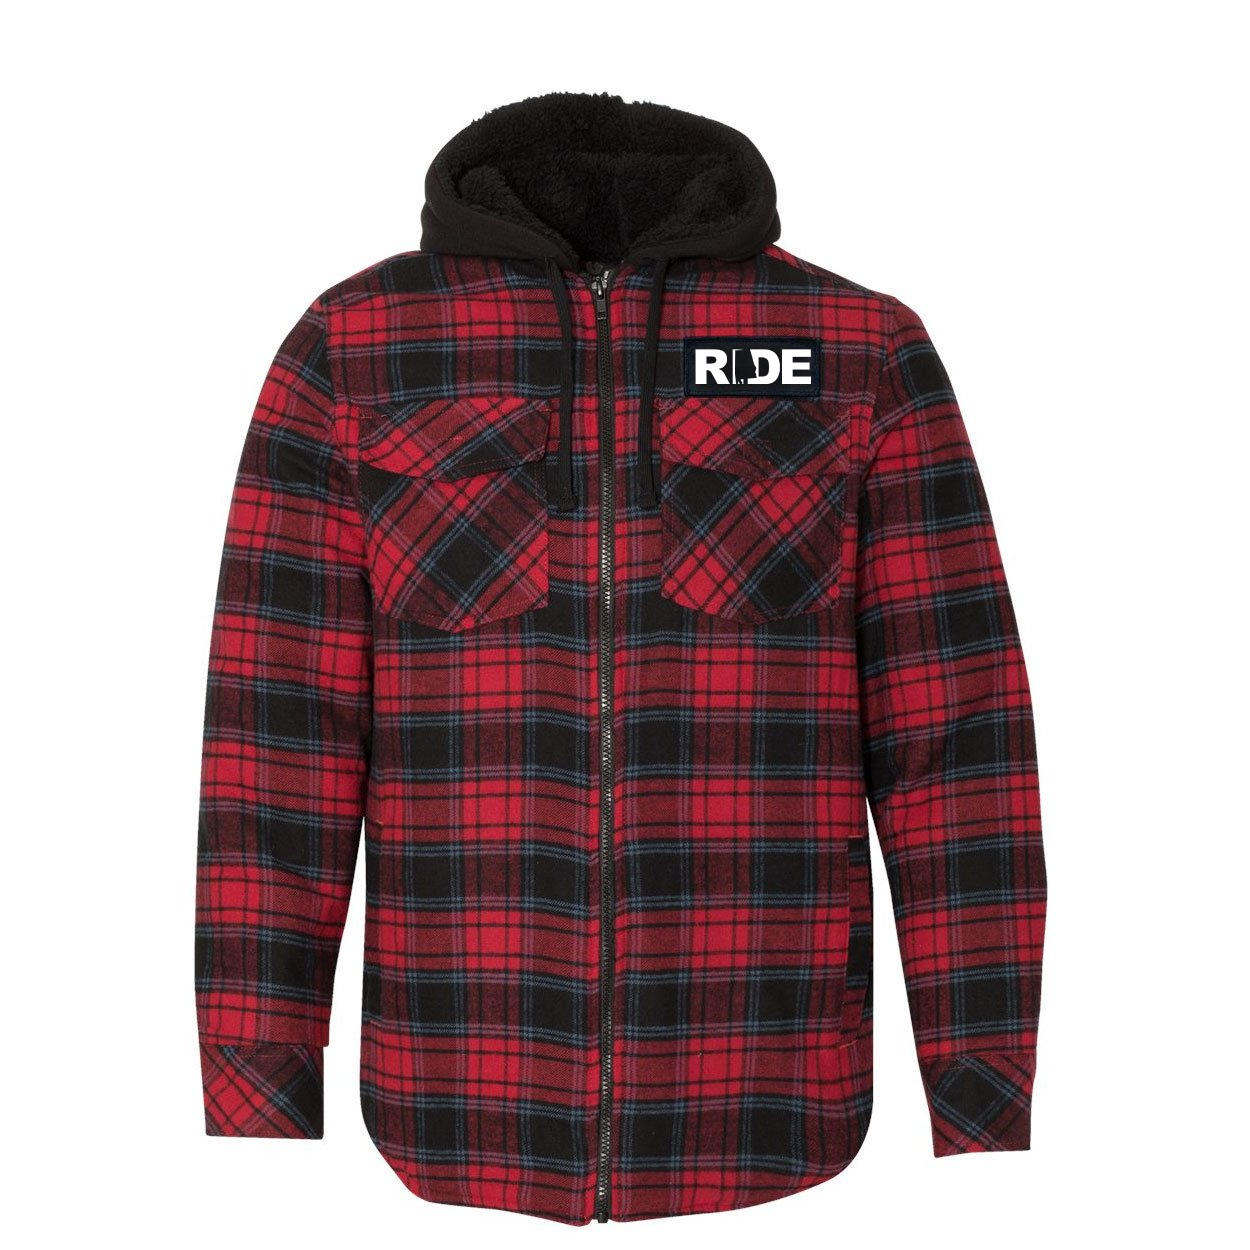 Ride Alabama Classic Unisex Full Zip Woven Patch Hooded Flannel Jacket Red/Black Buffalo (White Logo)